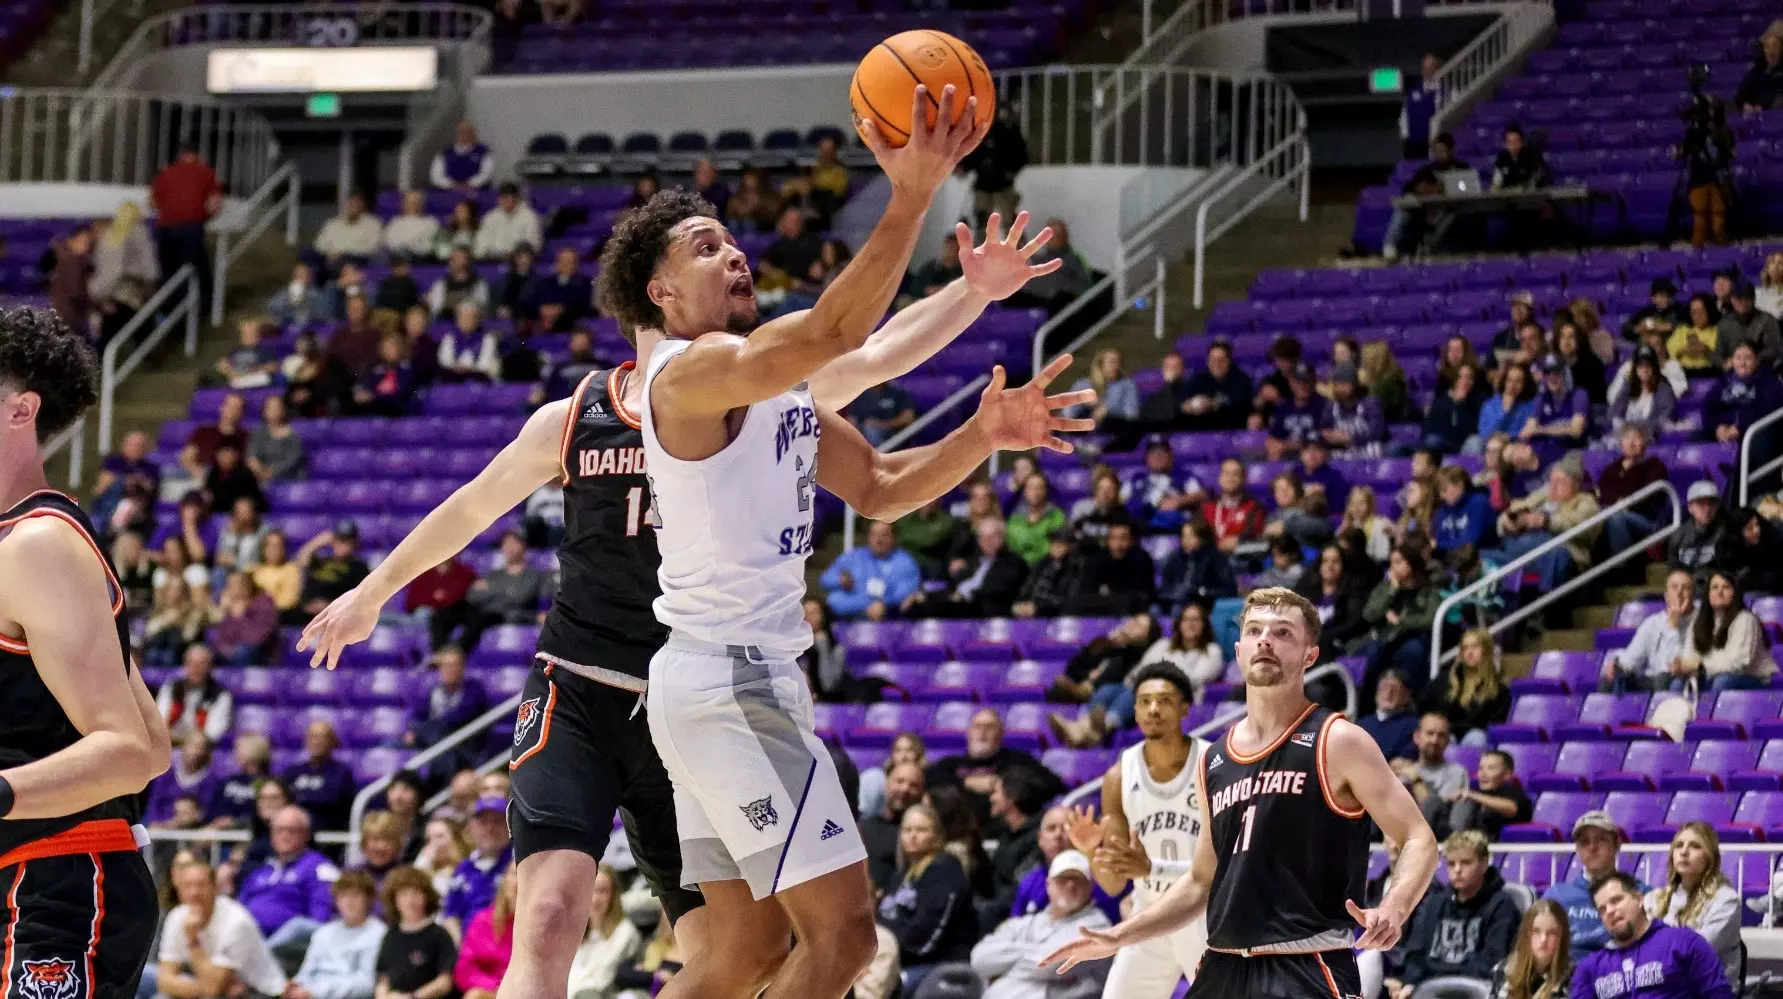 Weber+State+Mens+Guard+jumping+to+reach+the+ball+before+an+opposing+Idaho+State+player.